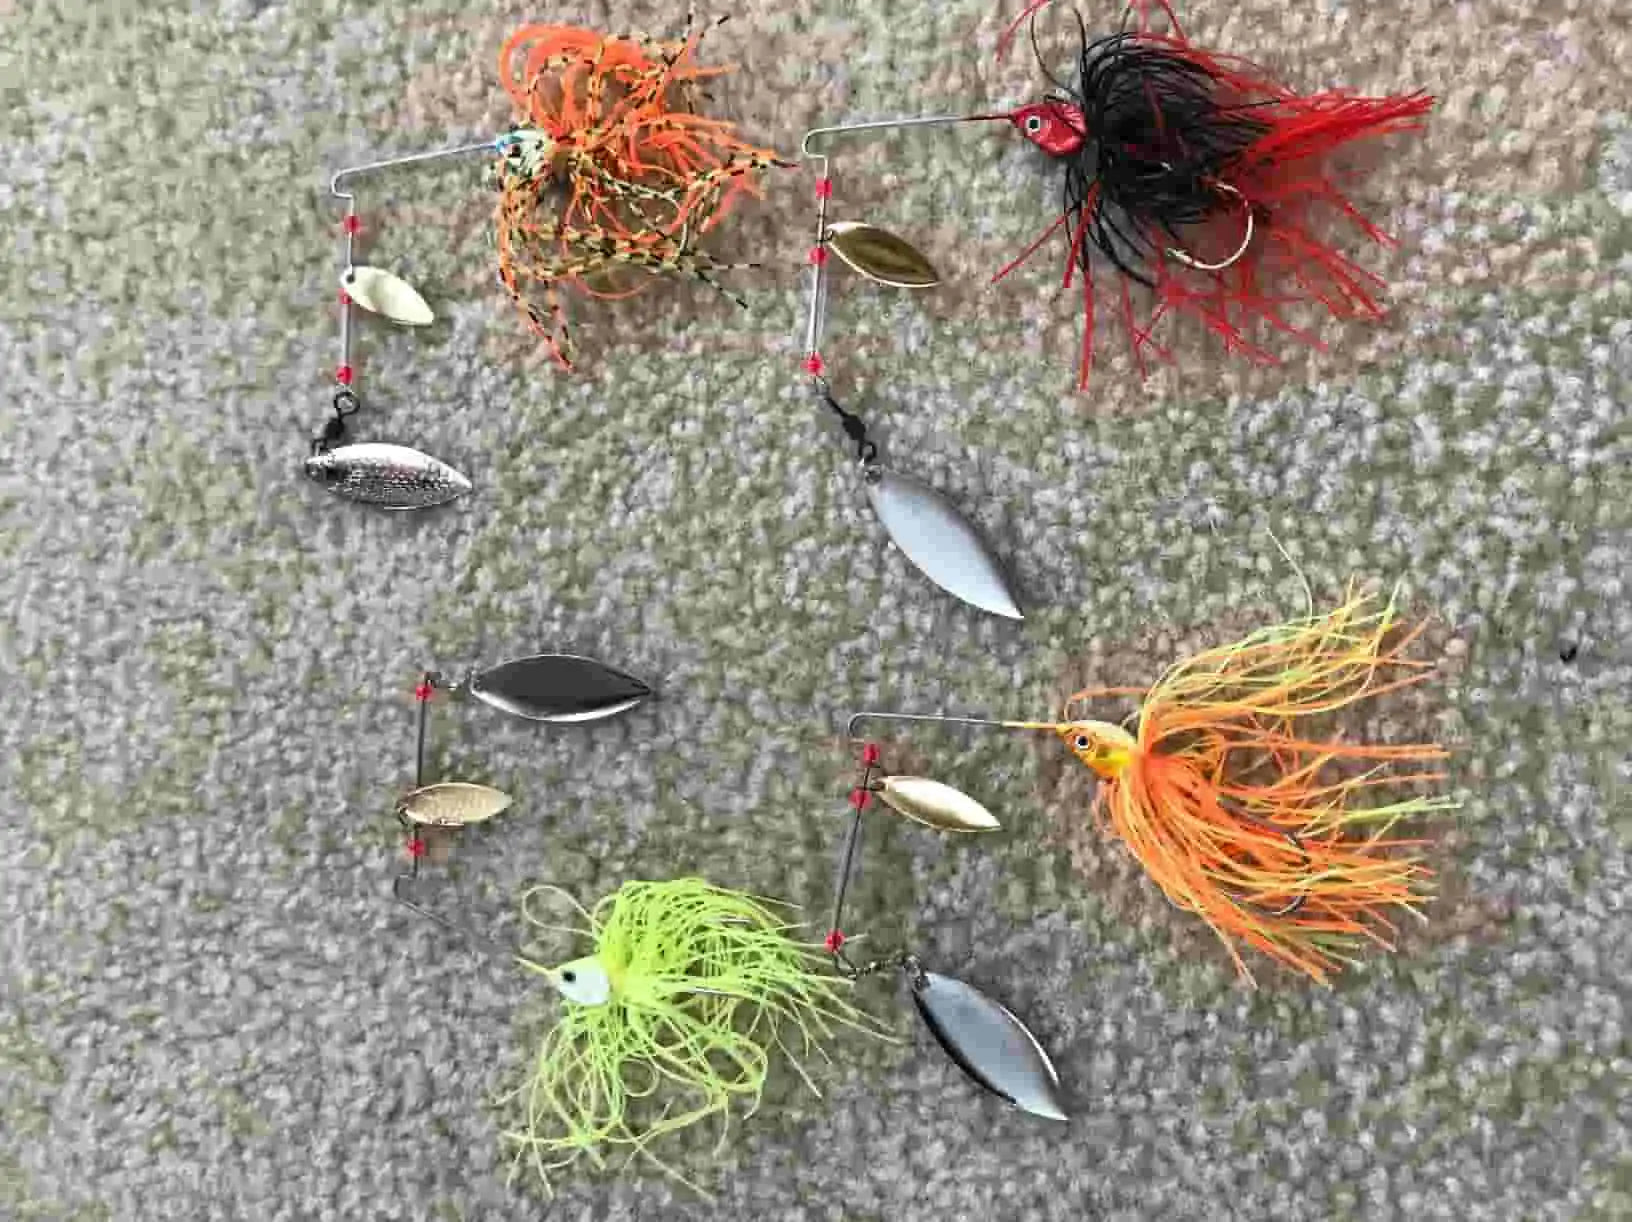 6 Reasons Why Jig Fishing Lures Are the Fish Catcher's Choice